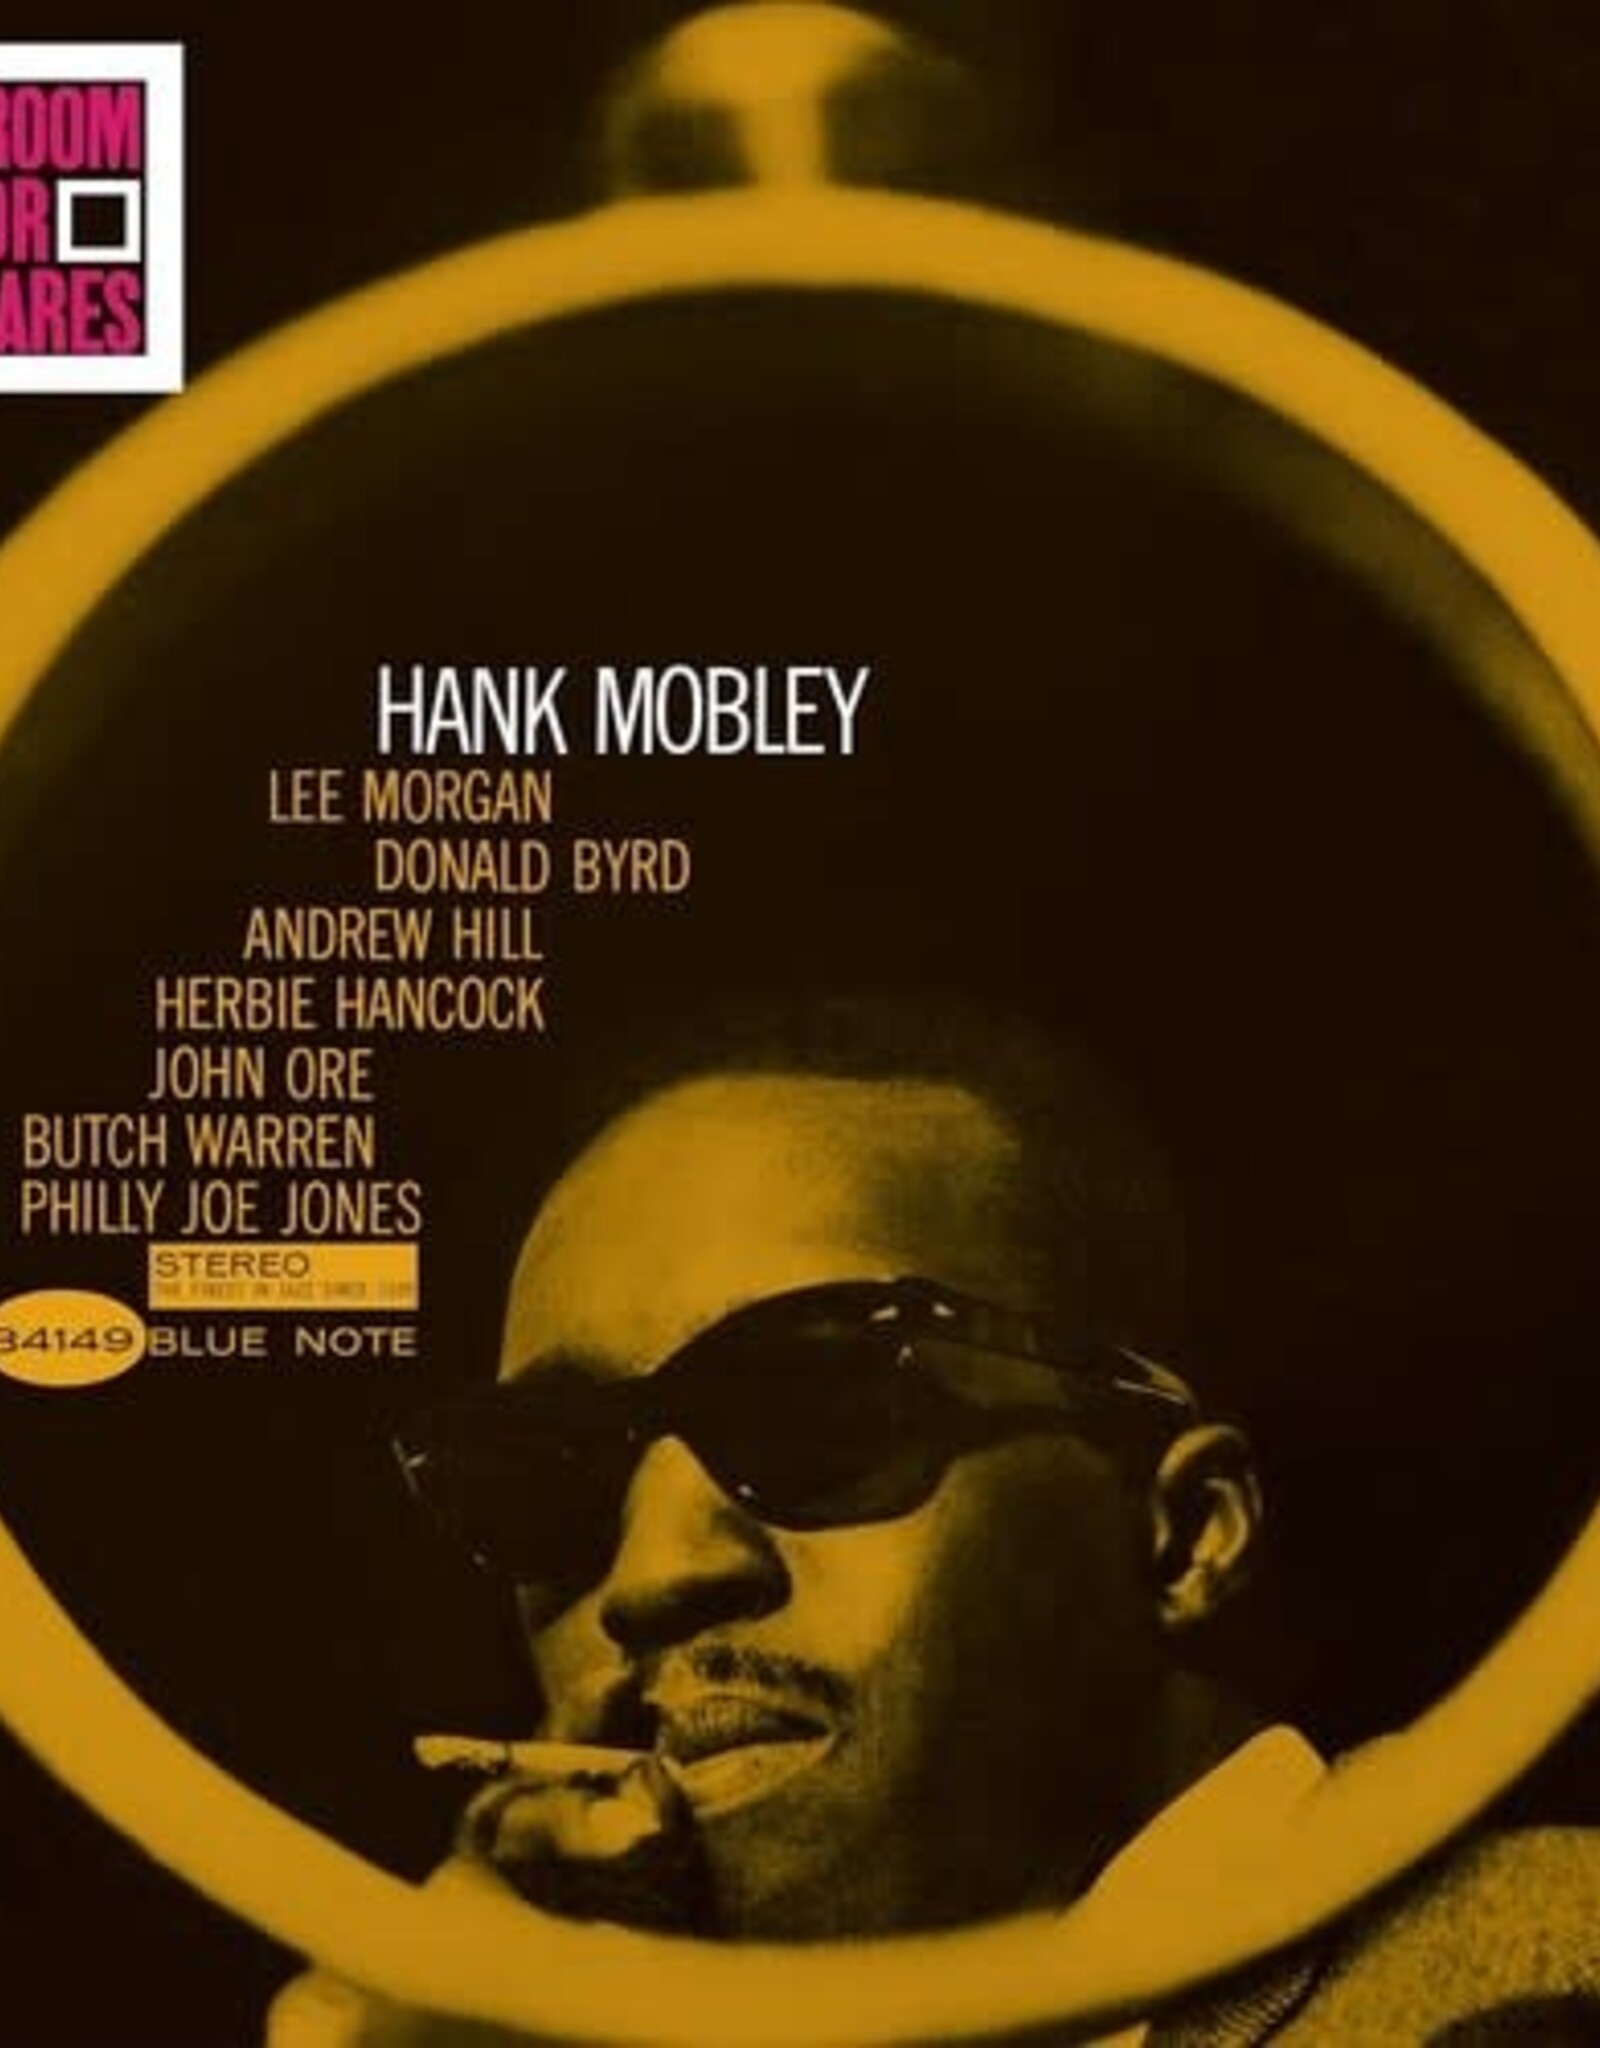 Hank Mobley - No Room For Squares (Blue Note Classic Vinyl Series)